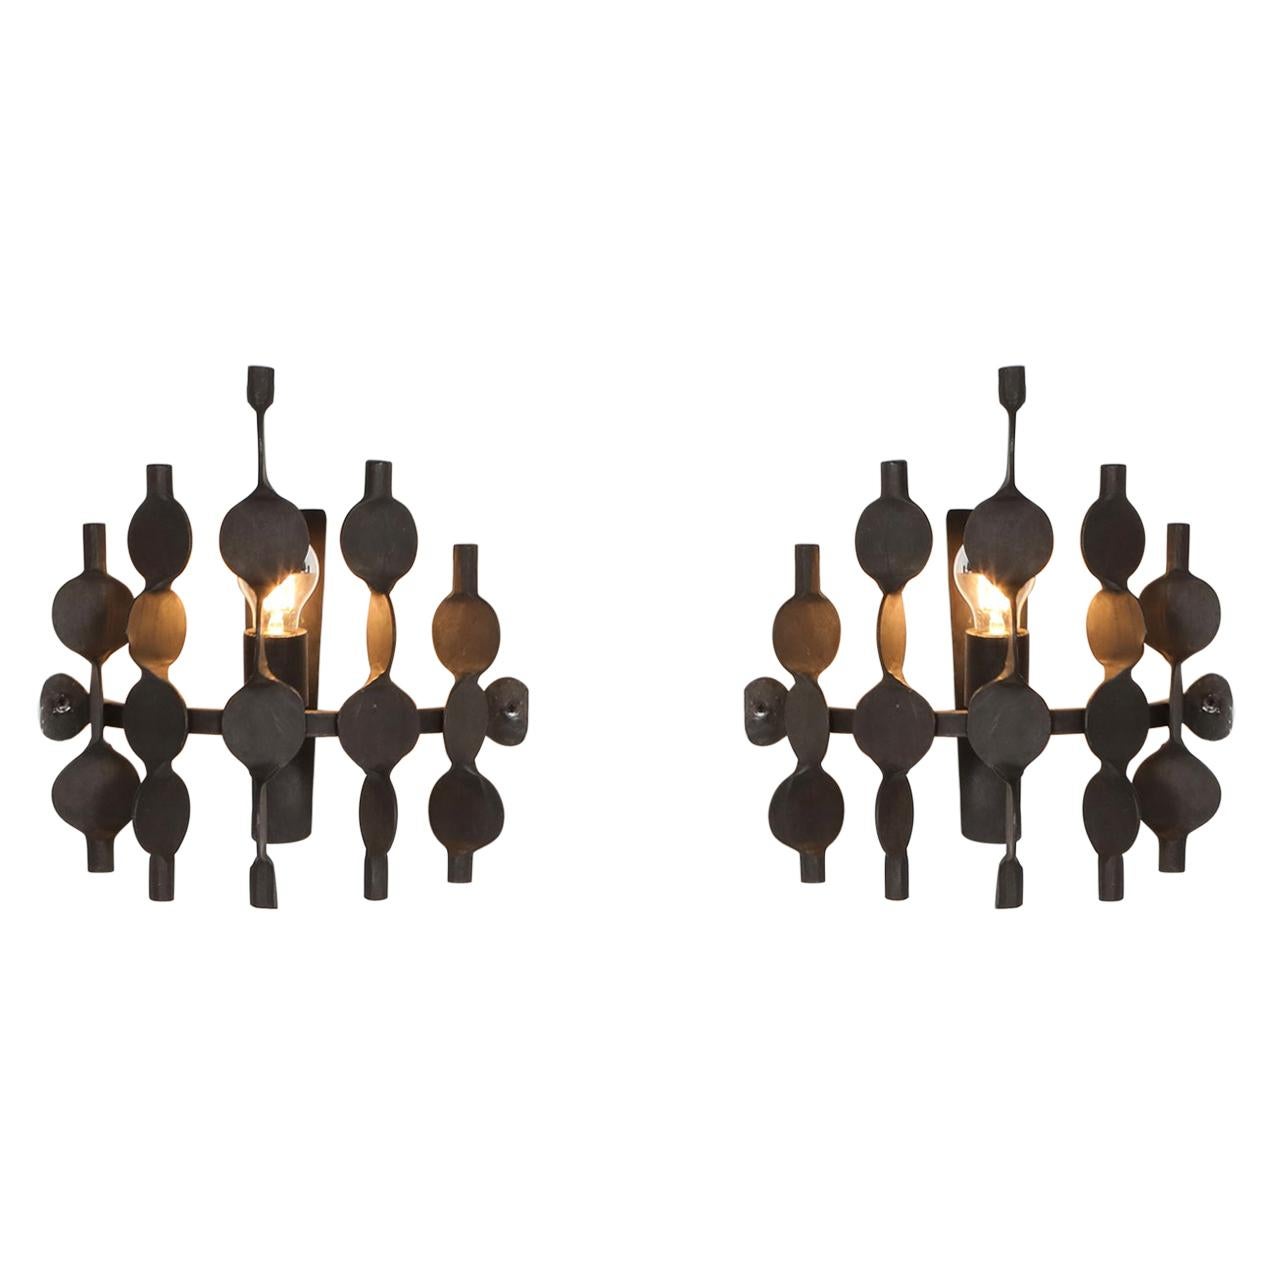 Brutalist Forged Iron Wall Sconces